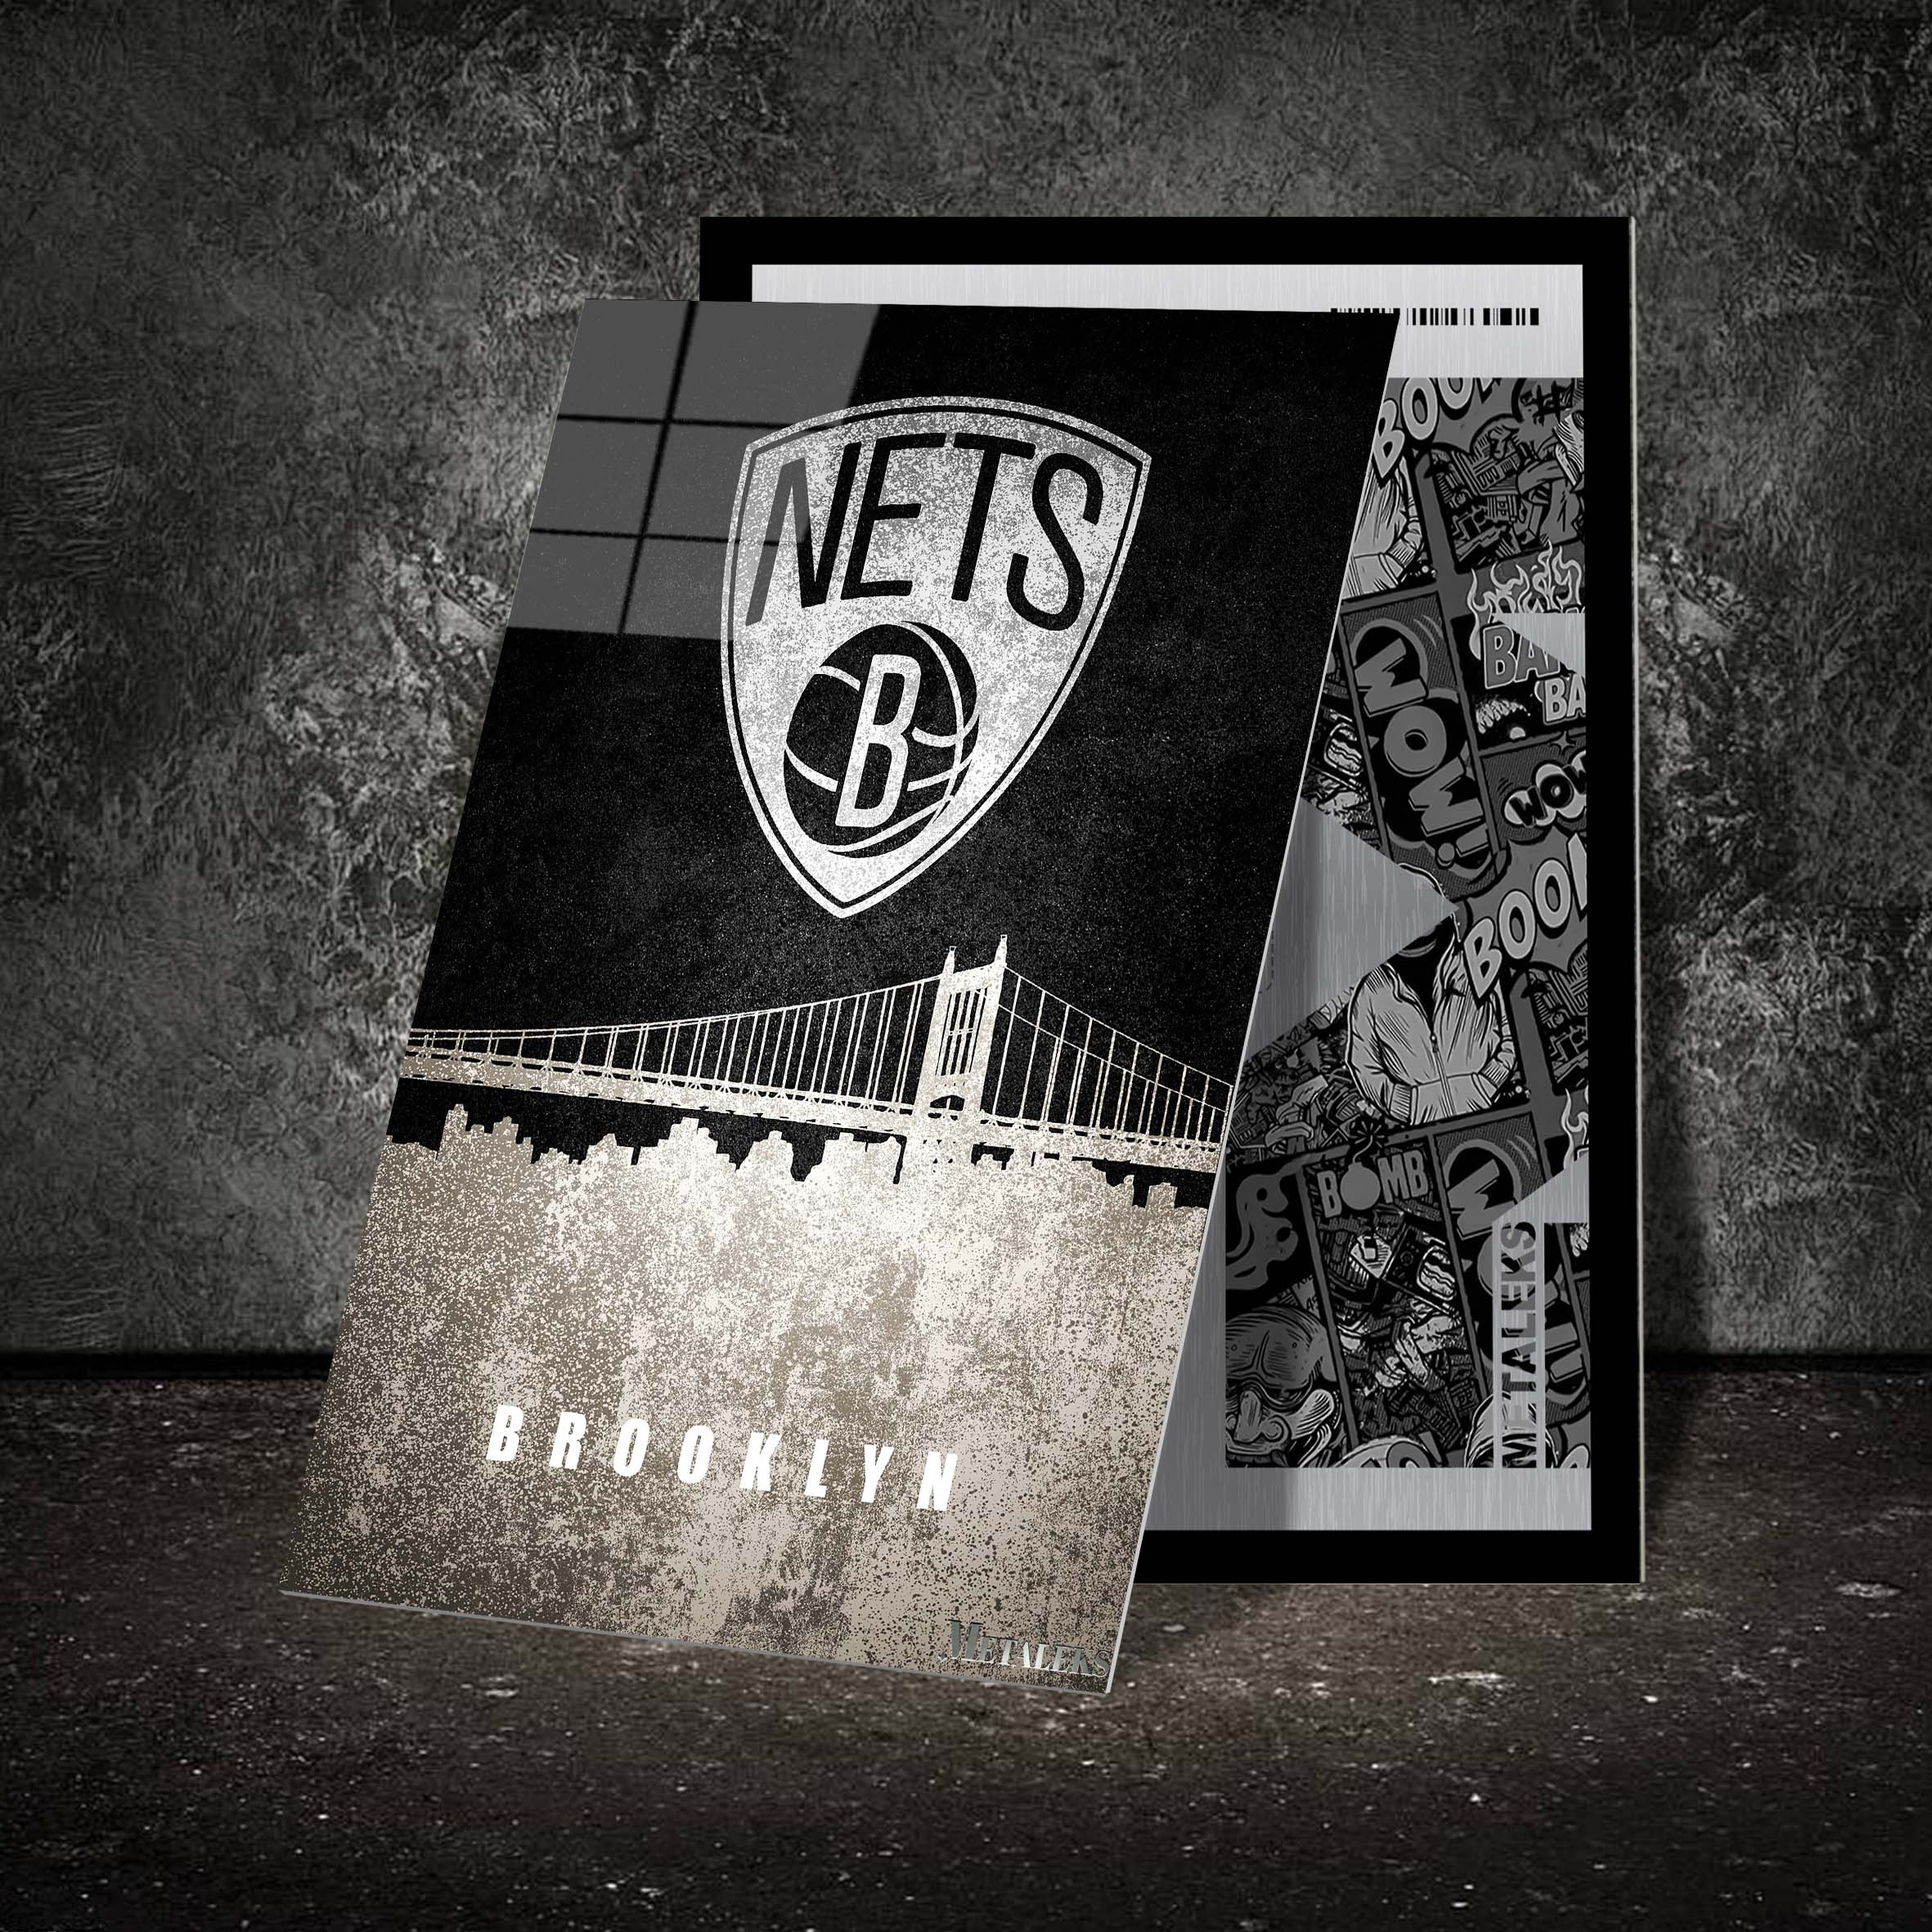 Brooklyn Nets New York State Map-designed by @Hoang Van Thuan